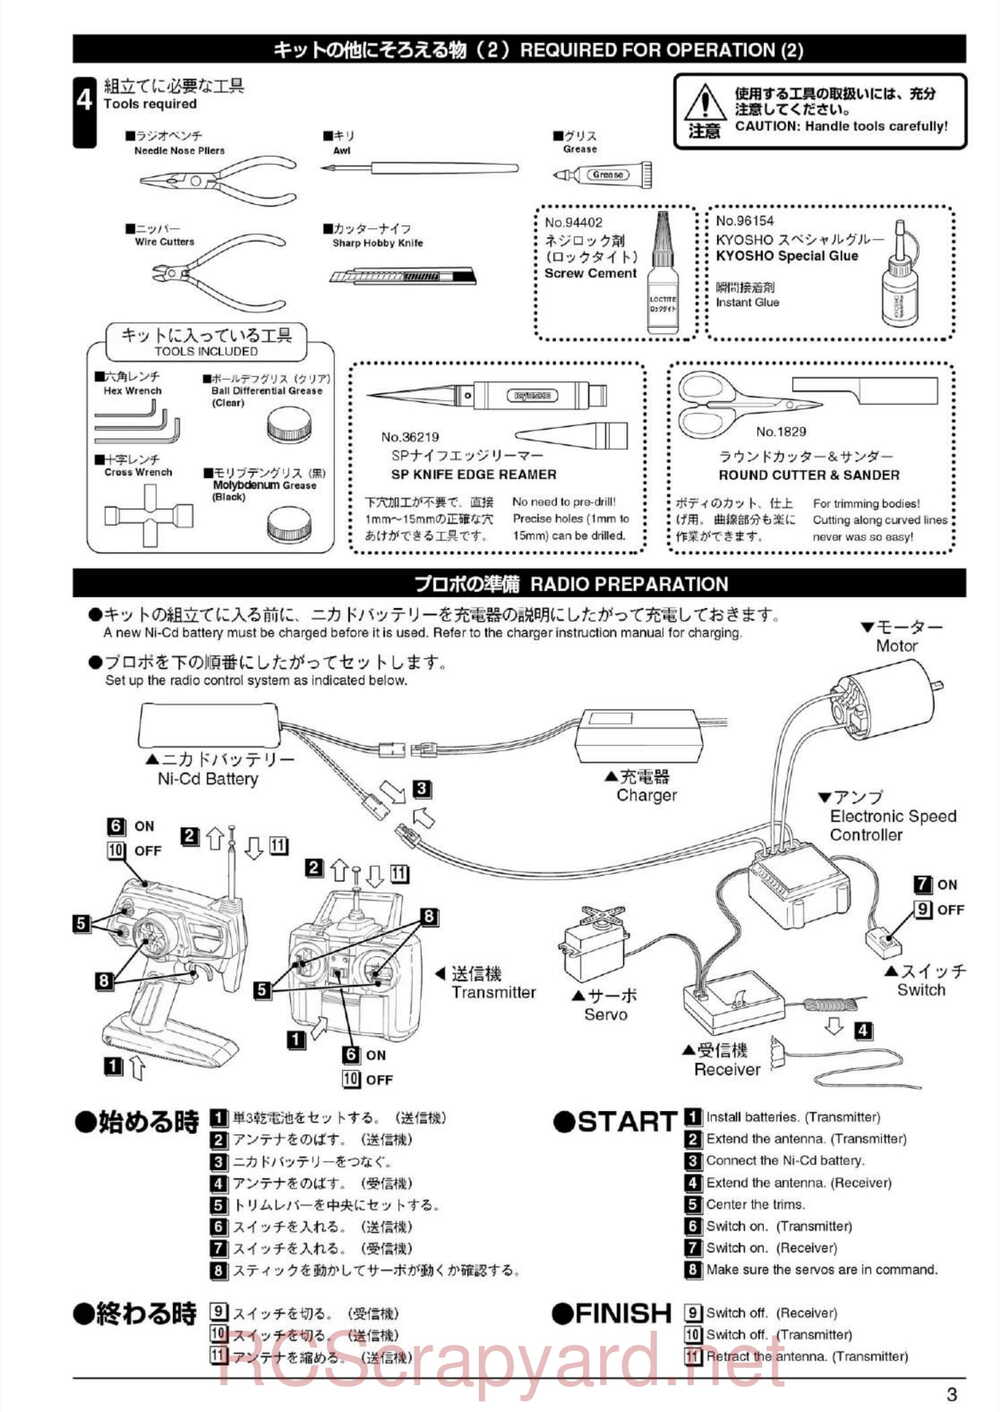 Kyosho - 30074 - Ultima-RB5 - Manual - Page 03